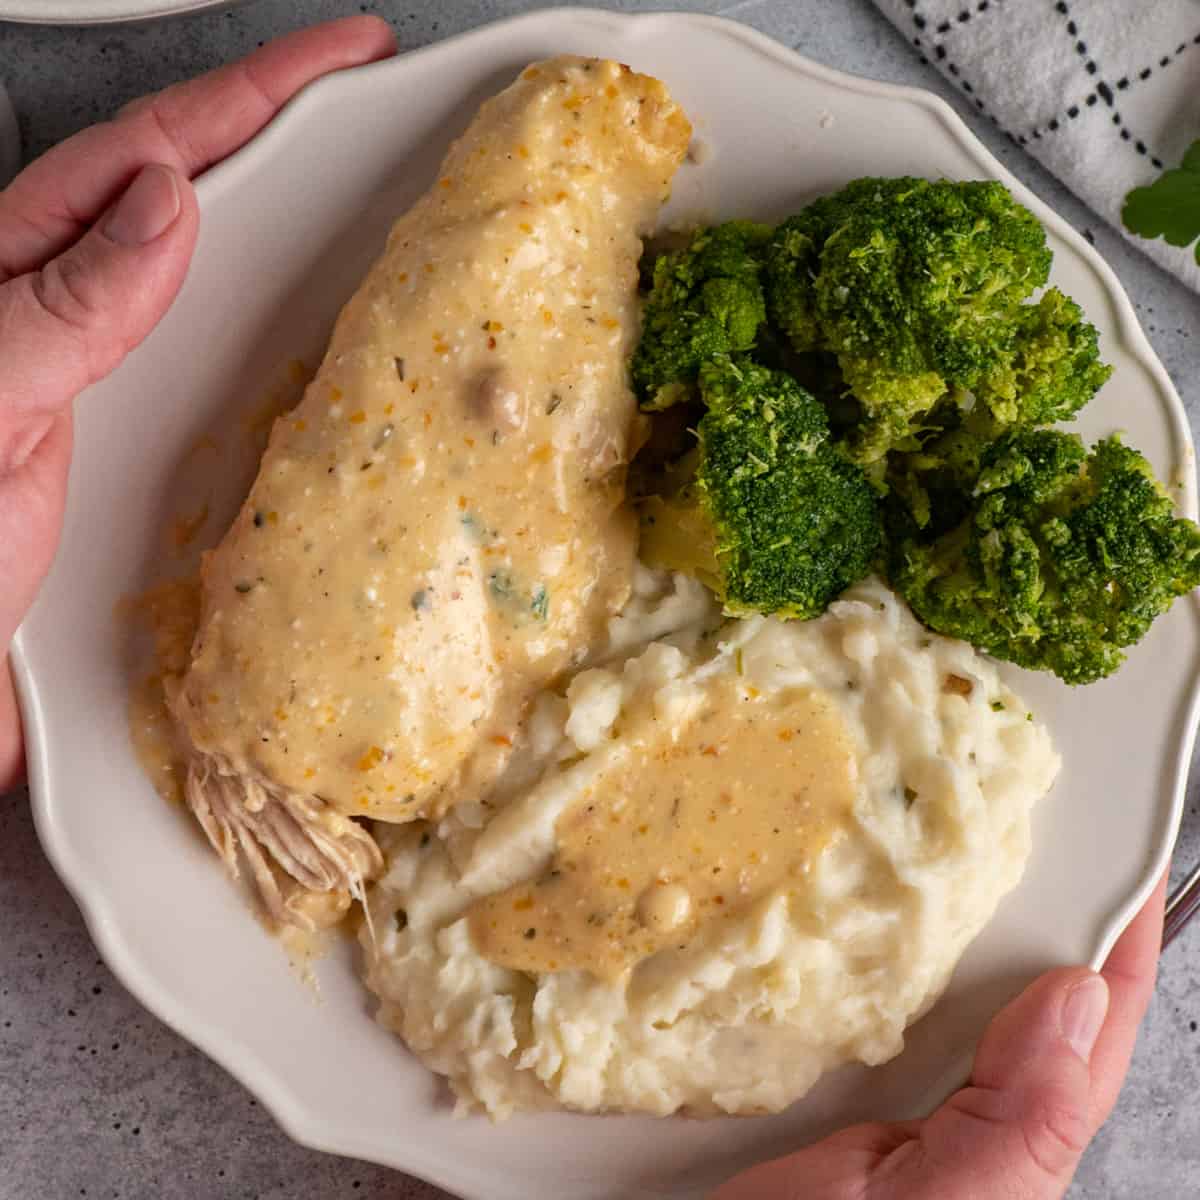 Crock pot ranch chicken on a plate with mashed potatoes and broccoli.